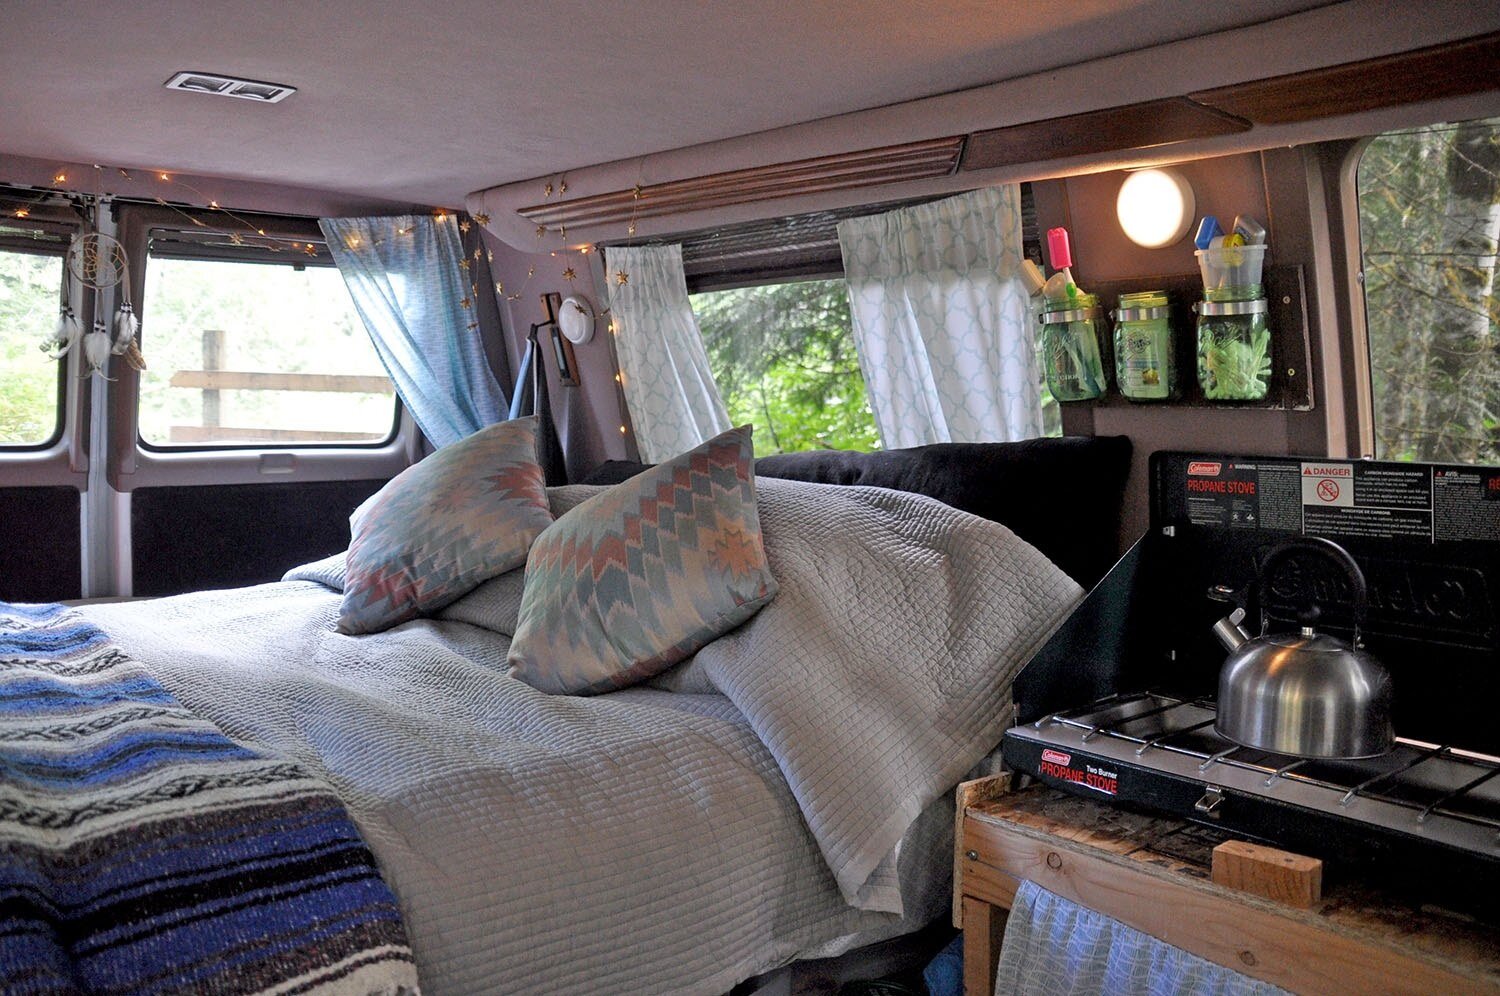 This was our first campervan bed, and we used a regular (spring) mattress that a friend was getting rid of, which barely fit inside our van. We used sheets and blankets we already had, and found pillows at a thrift store. It was a very inexpensive way to make a DIY campervan bed!